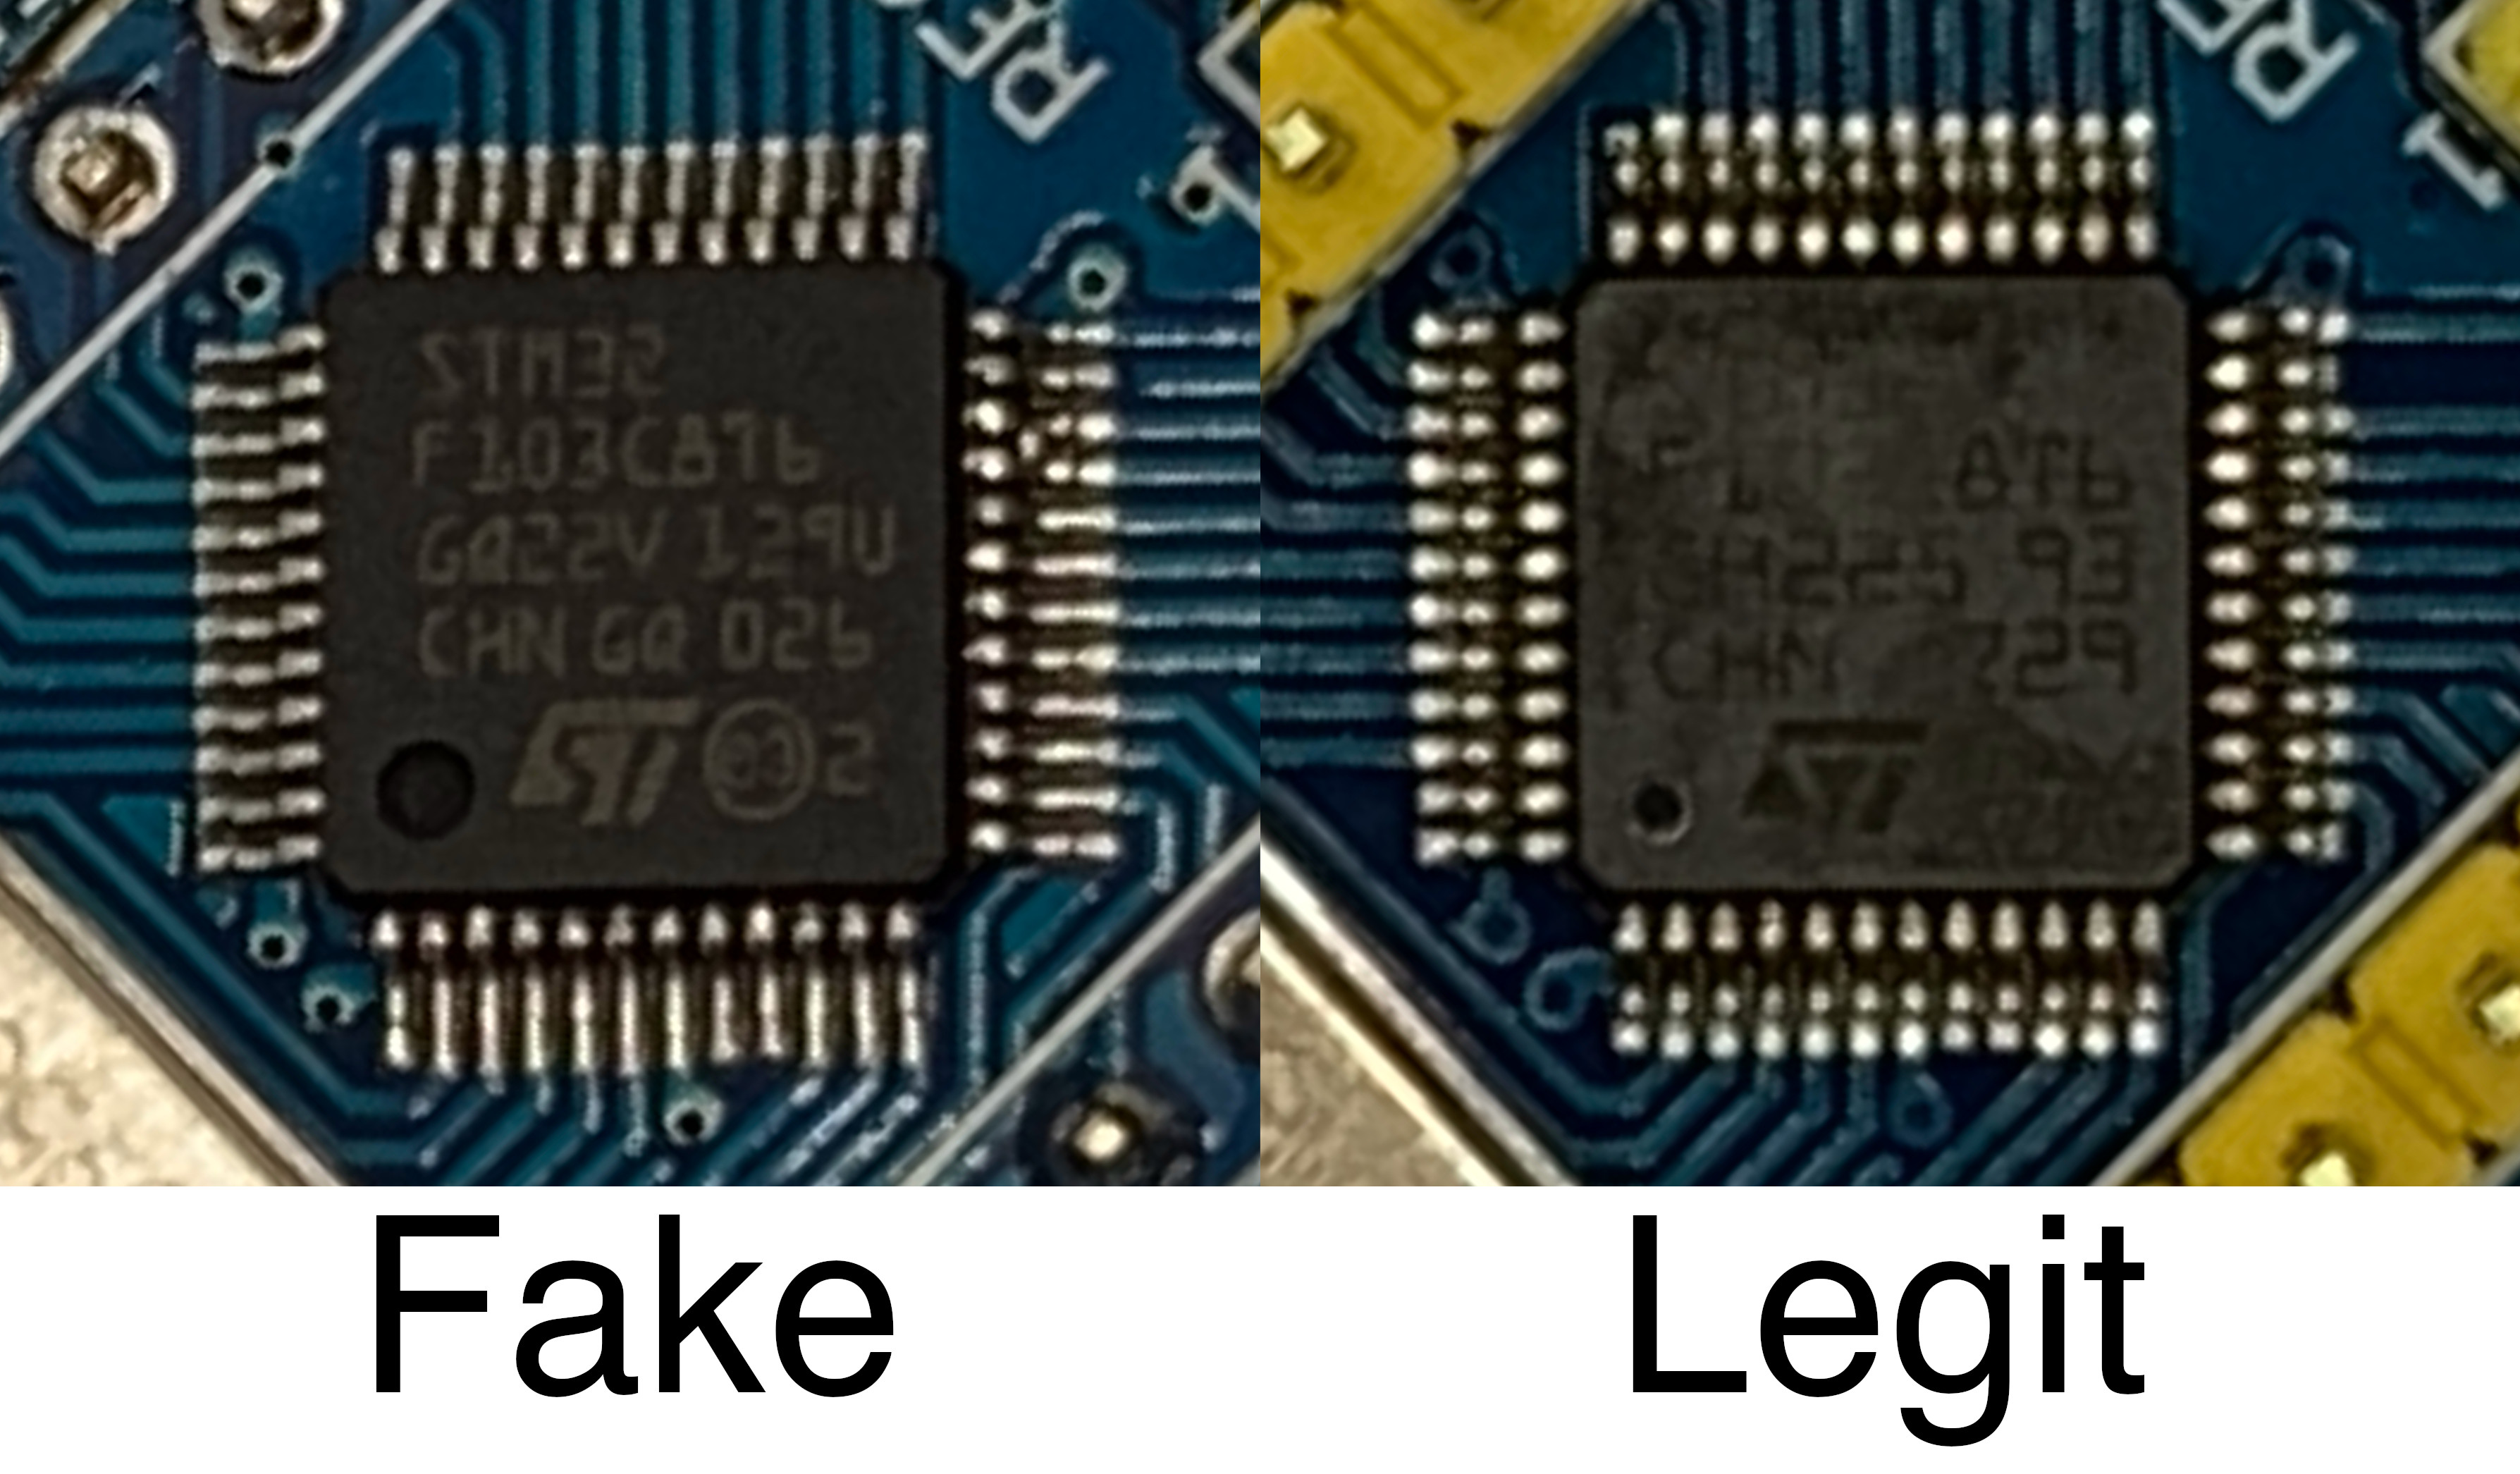 Comparison of a clone STM32 to a legitimate STM32.  Note the differences in the ST logo.